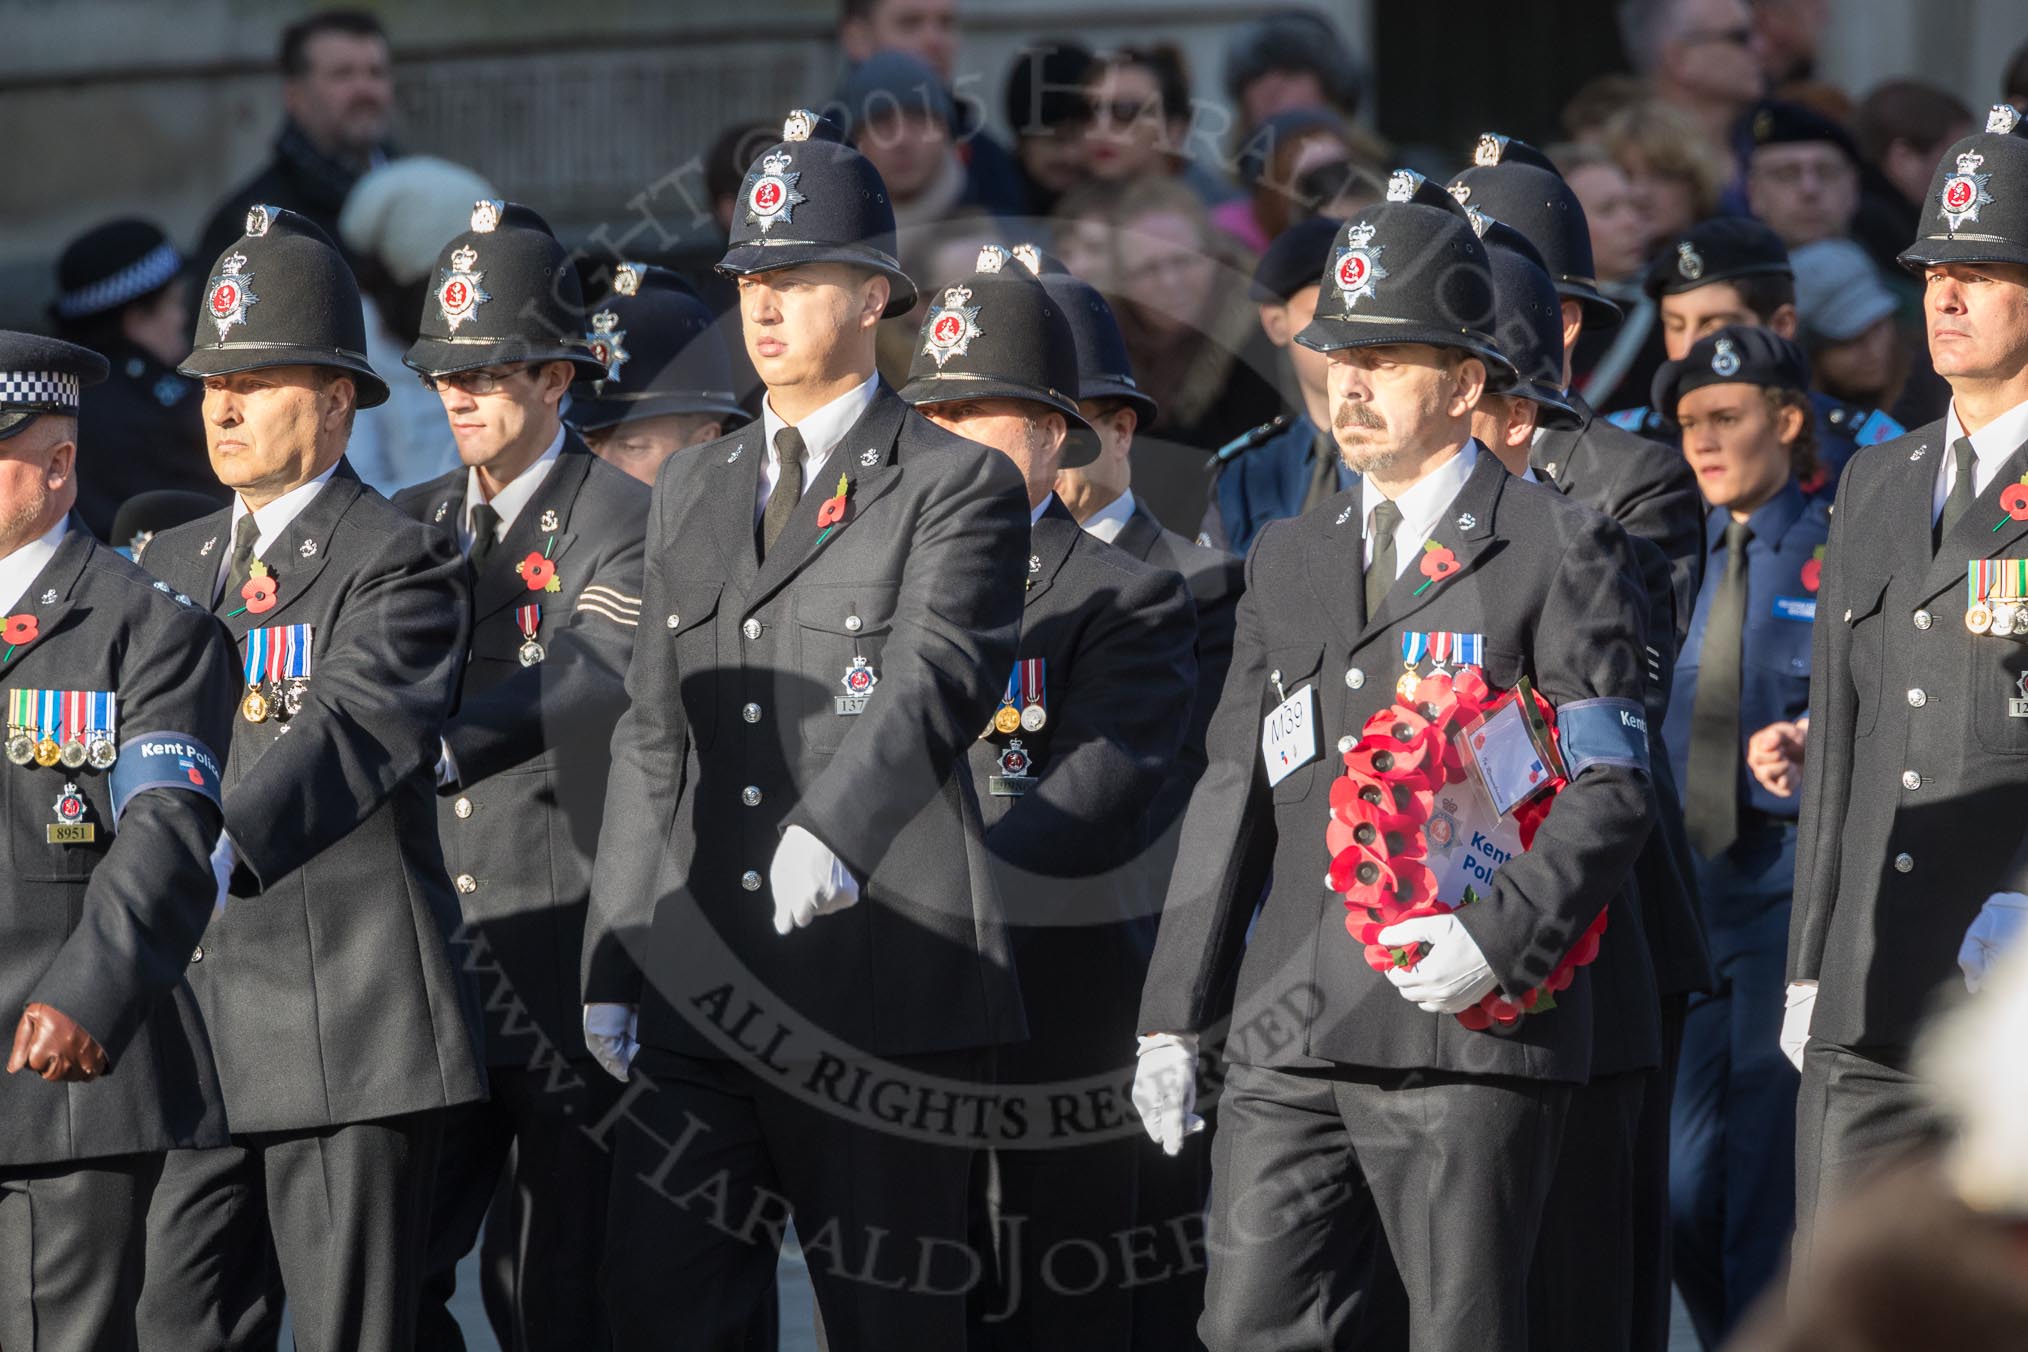 March Past, Remembrance Sunday at the Cenotaph 2016: M39 Kent Police.
Cenotaph, Whitehall, London SW1,
London,
Greater London,
United Kingdom,
on 13 November 2016 at 13:19, image #2933